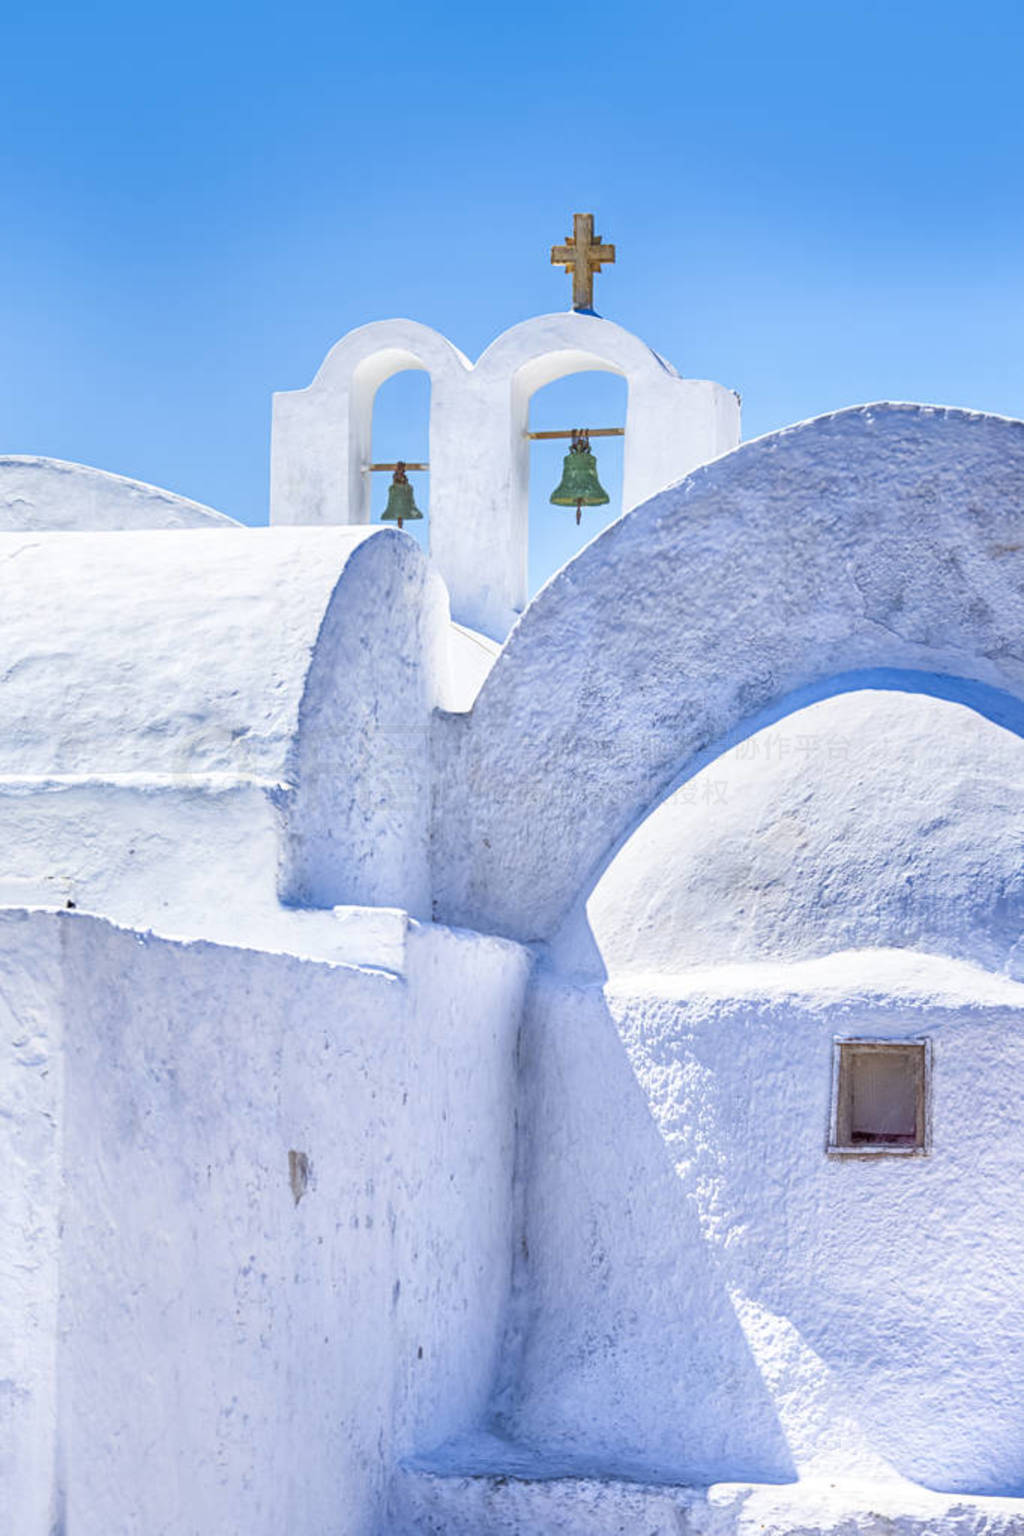 White Walls of Traditional Greek Church With Bells and Cross as